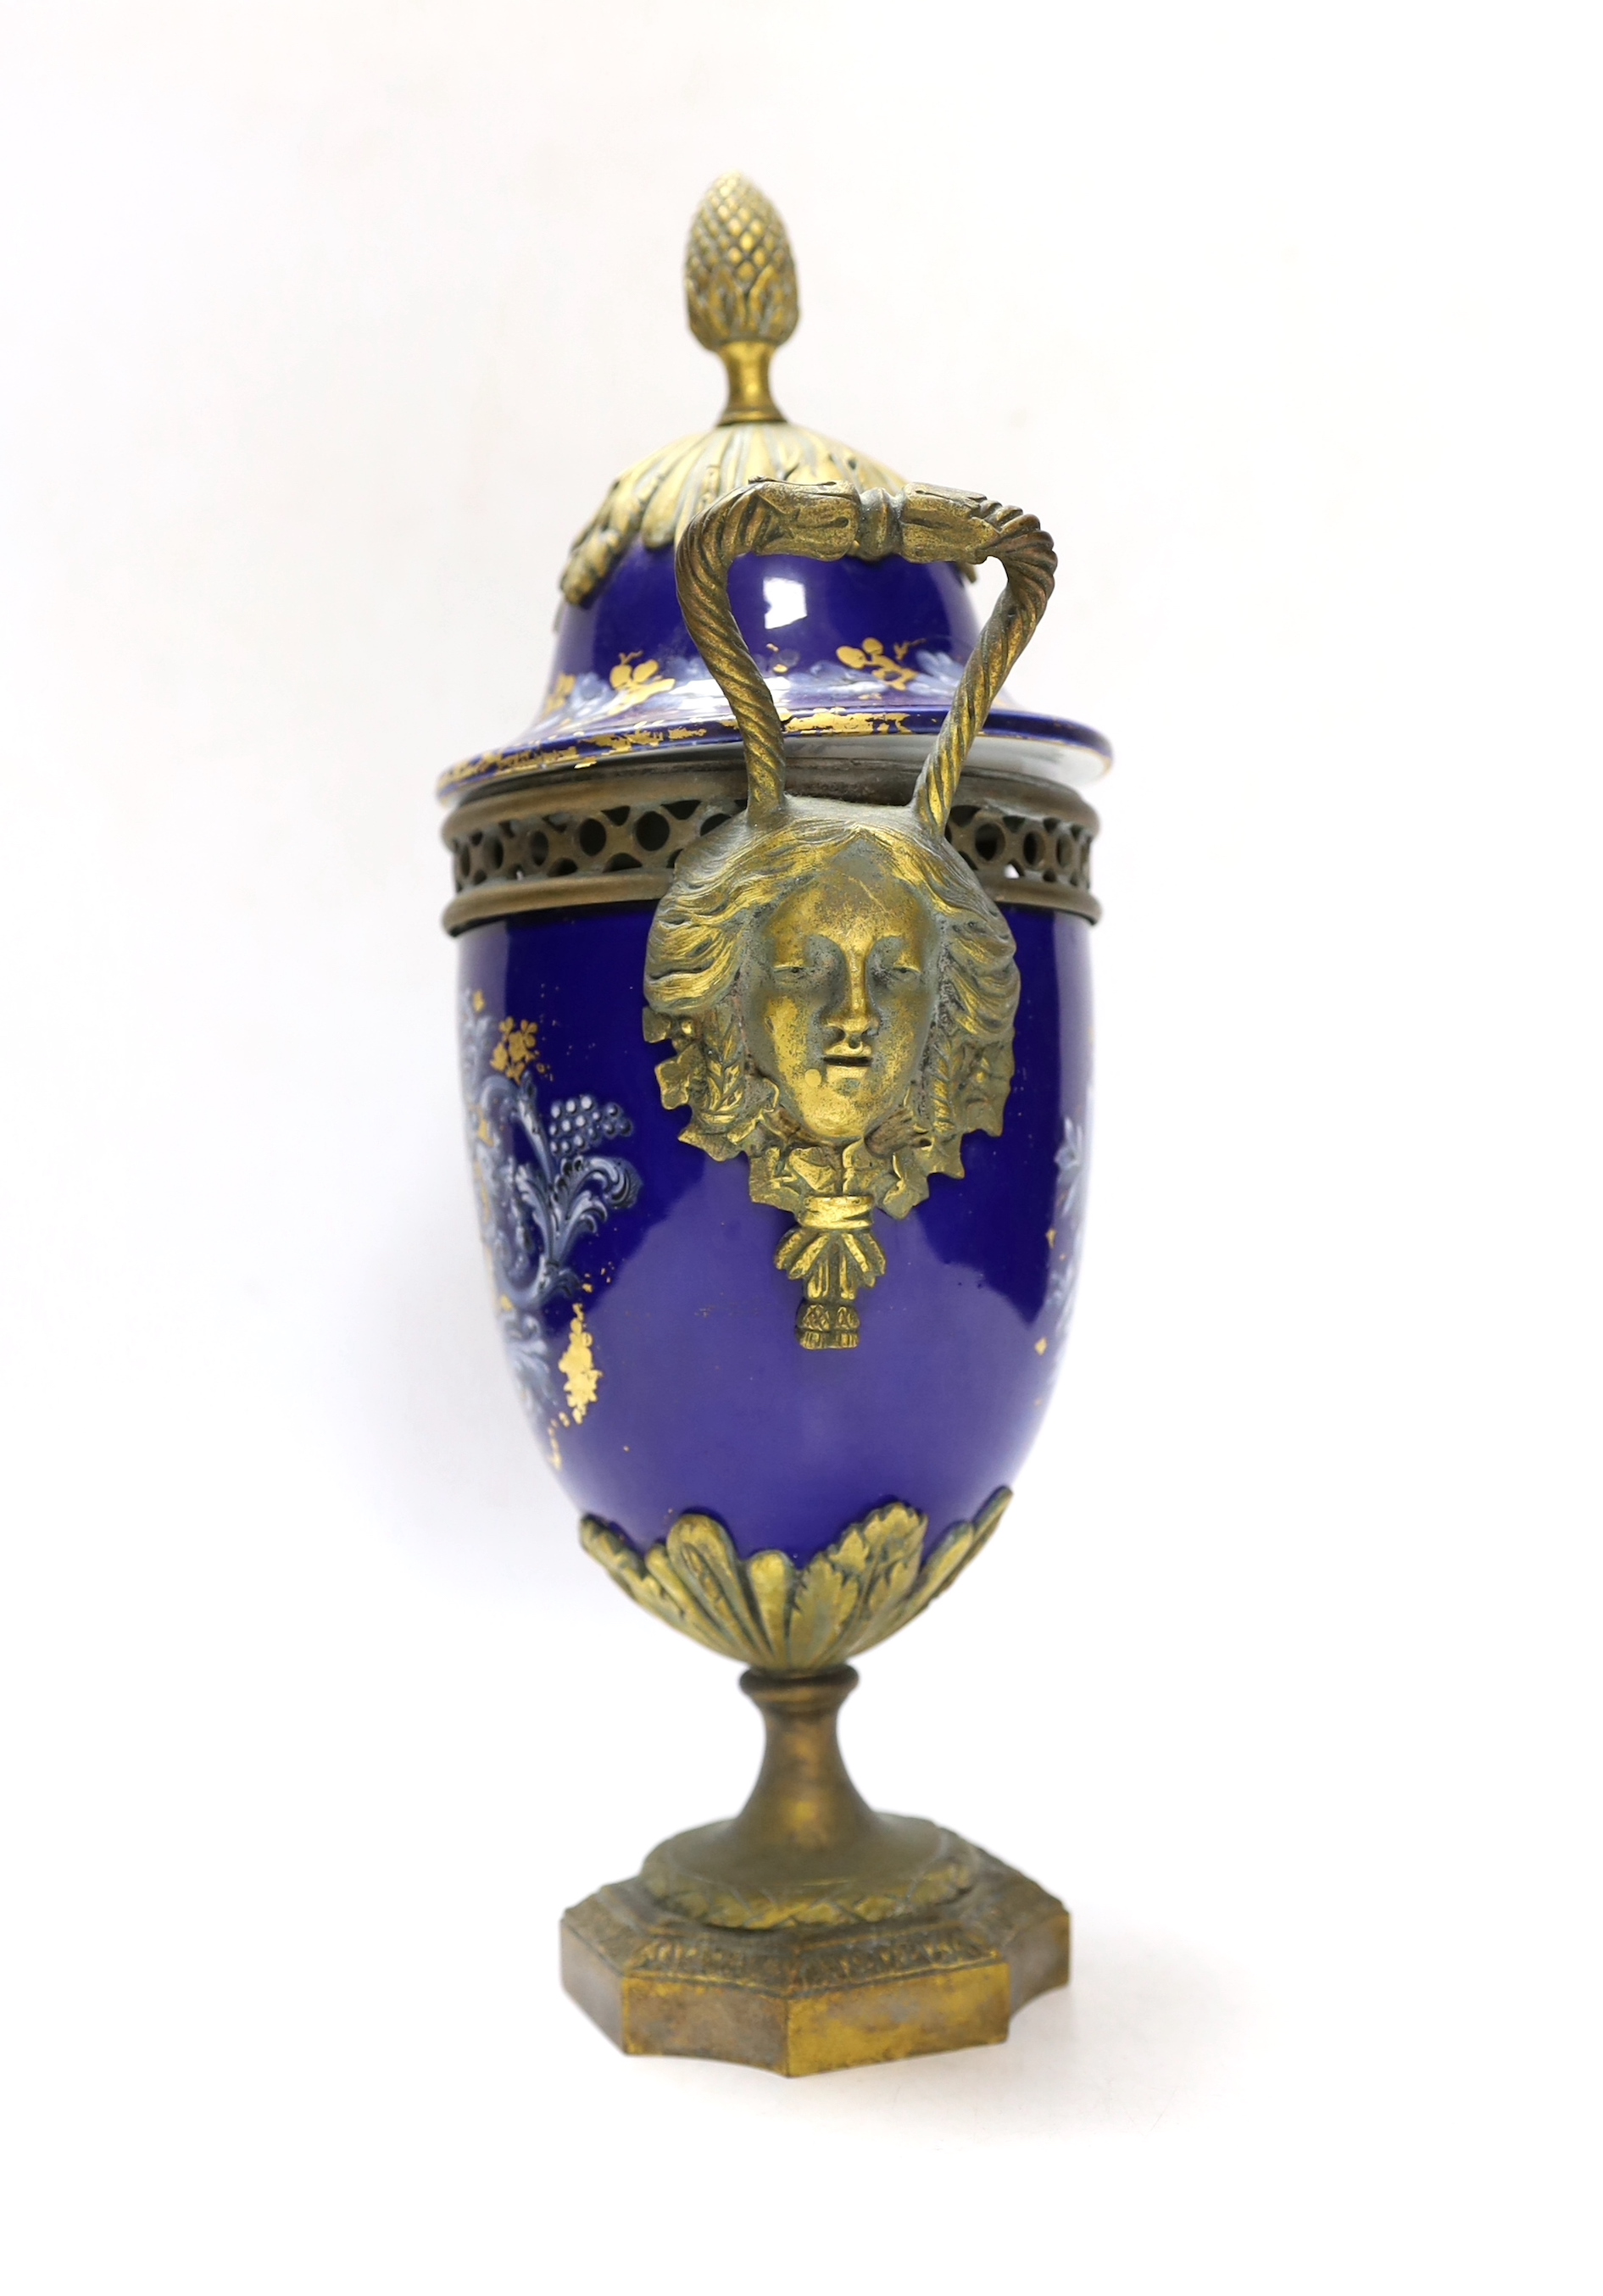 A Limoges style porcelain ormolu mounted urn and cover, 29cm high